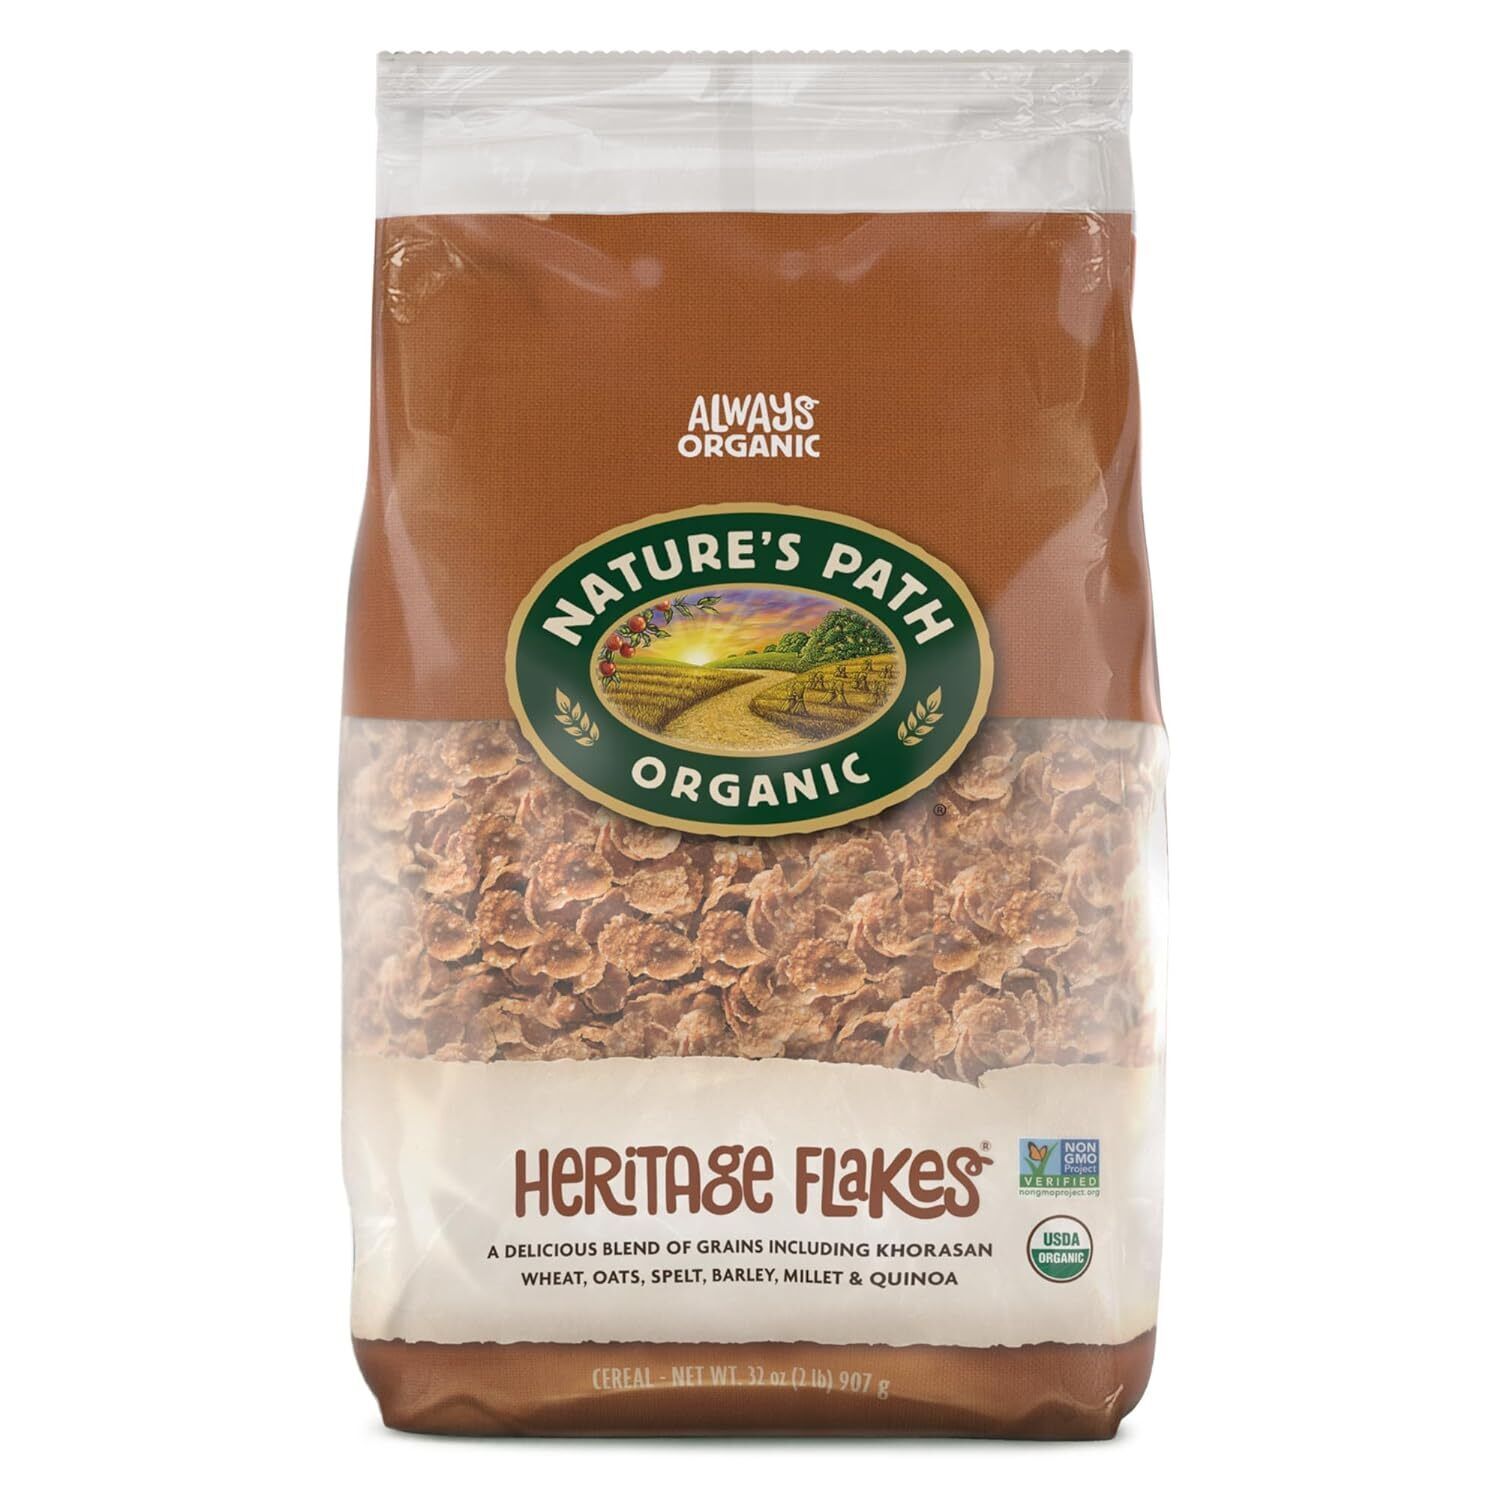 Organic Heritage Flakes Cereal, 2 Lbs. Earth Friendly Package (Pack of 6)